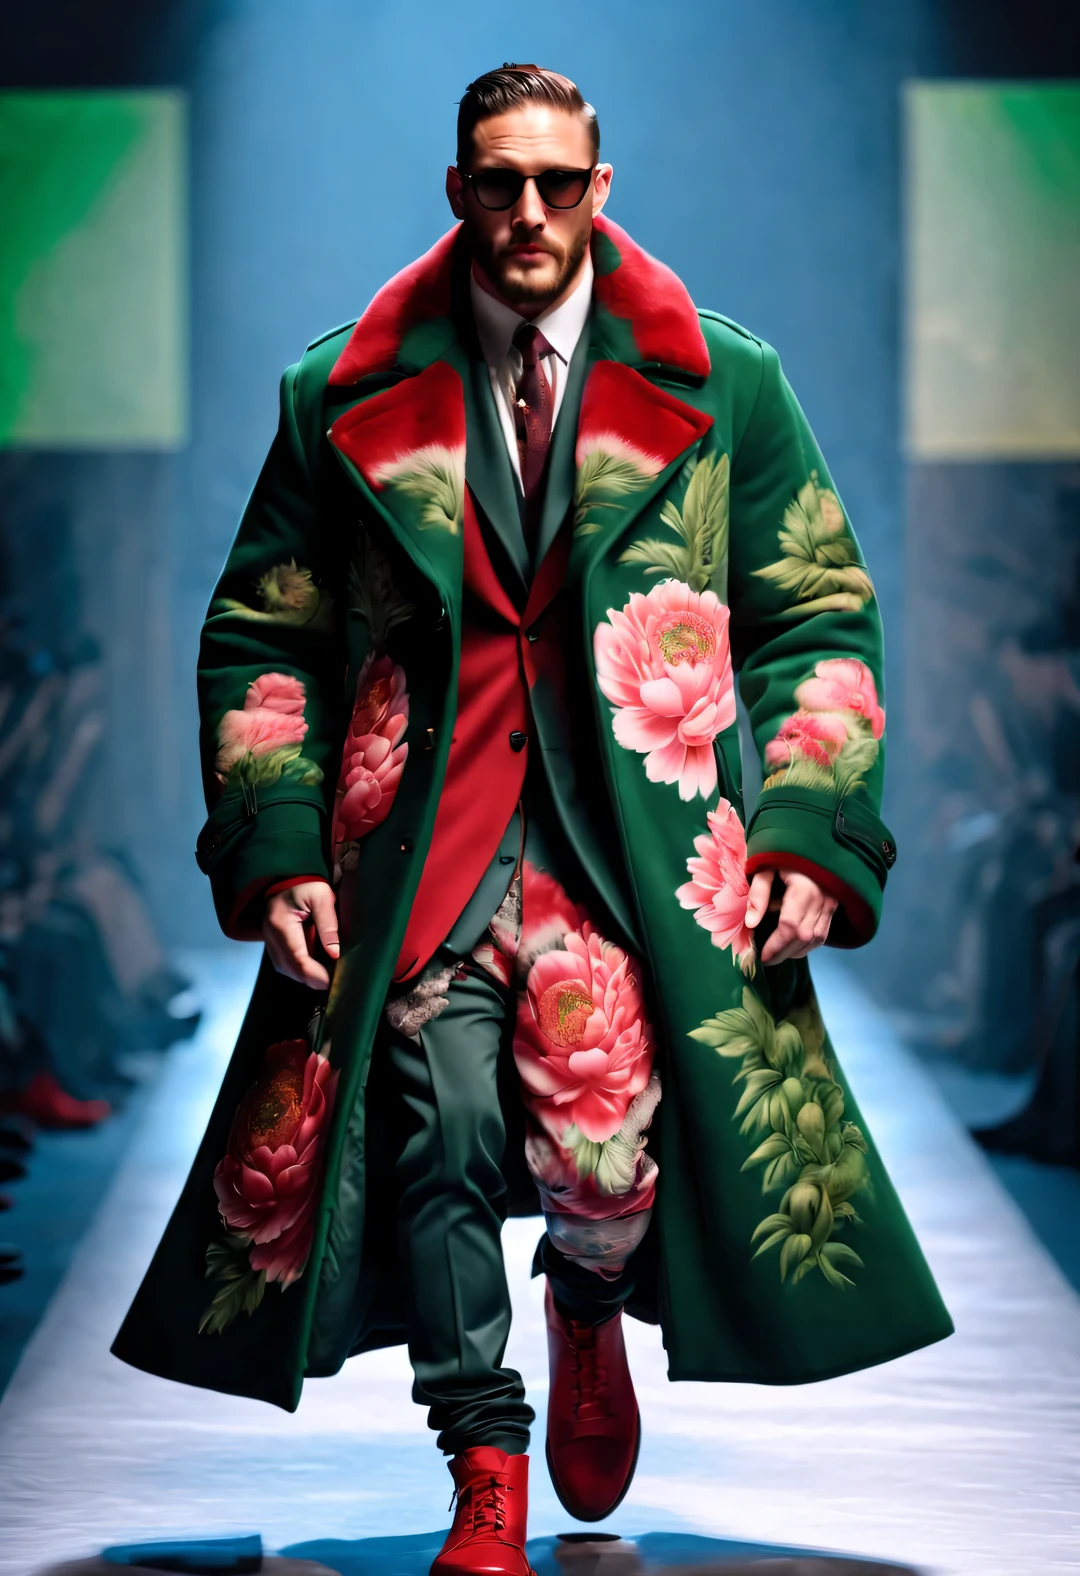 On the fashion show, Tom Hardy, Tall fit male model, (Wearing a thick cotton coat made of red and green peony cloth: 1.34), (Extra long cotton military coat: 0.65), Has warmth、Windproof cotton coat, peony flower, Leaves, Embroidery with Suzhou red and green peony pattern as the theme, (Tan fur coat collar), (tibetan shaman jewelry), complex mixed styles, (Gentlemanly manners), Embroidered Su Embroidery Big Red Parka Snow Coat, (exceed) coat jacket, (big duckbill hat), (Black Sweater), jeans, (winter scarf warm scarf), gloves gloves, belt, Cotton boots, sunglasses, Combat boots, sports shoes, big photography,
background: Indoor T-shaped track, T-shaped platform, (snow), depth of field, Ultra-clear, super high quality,